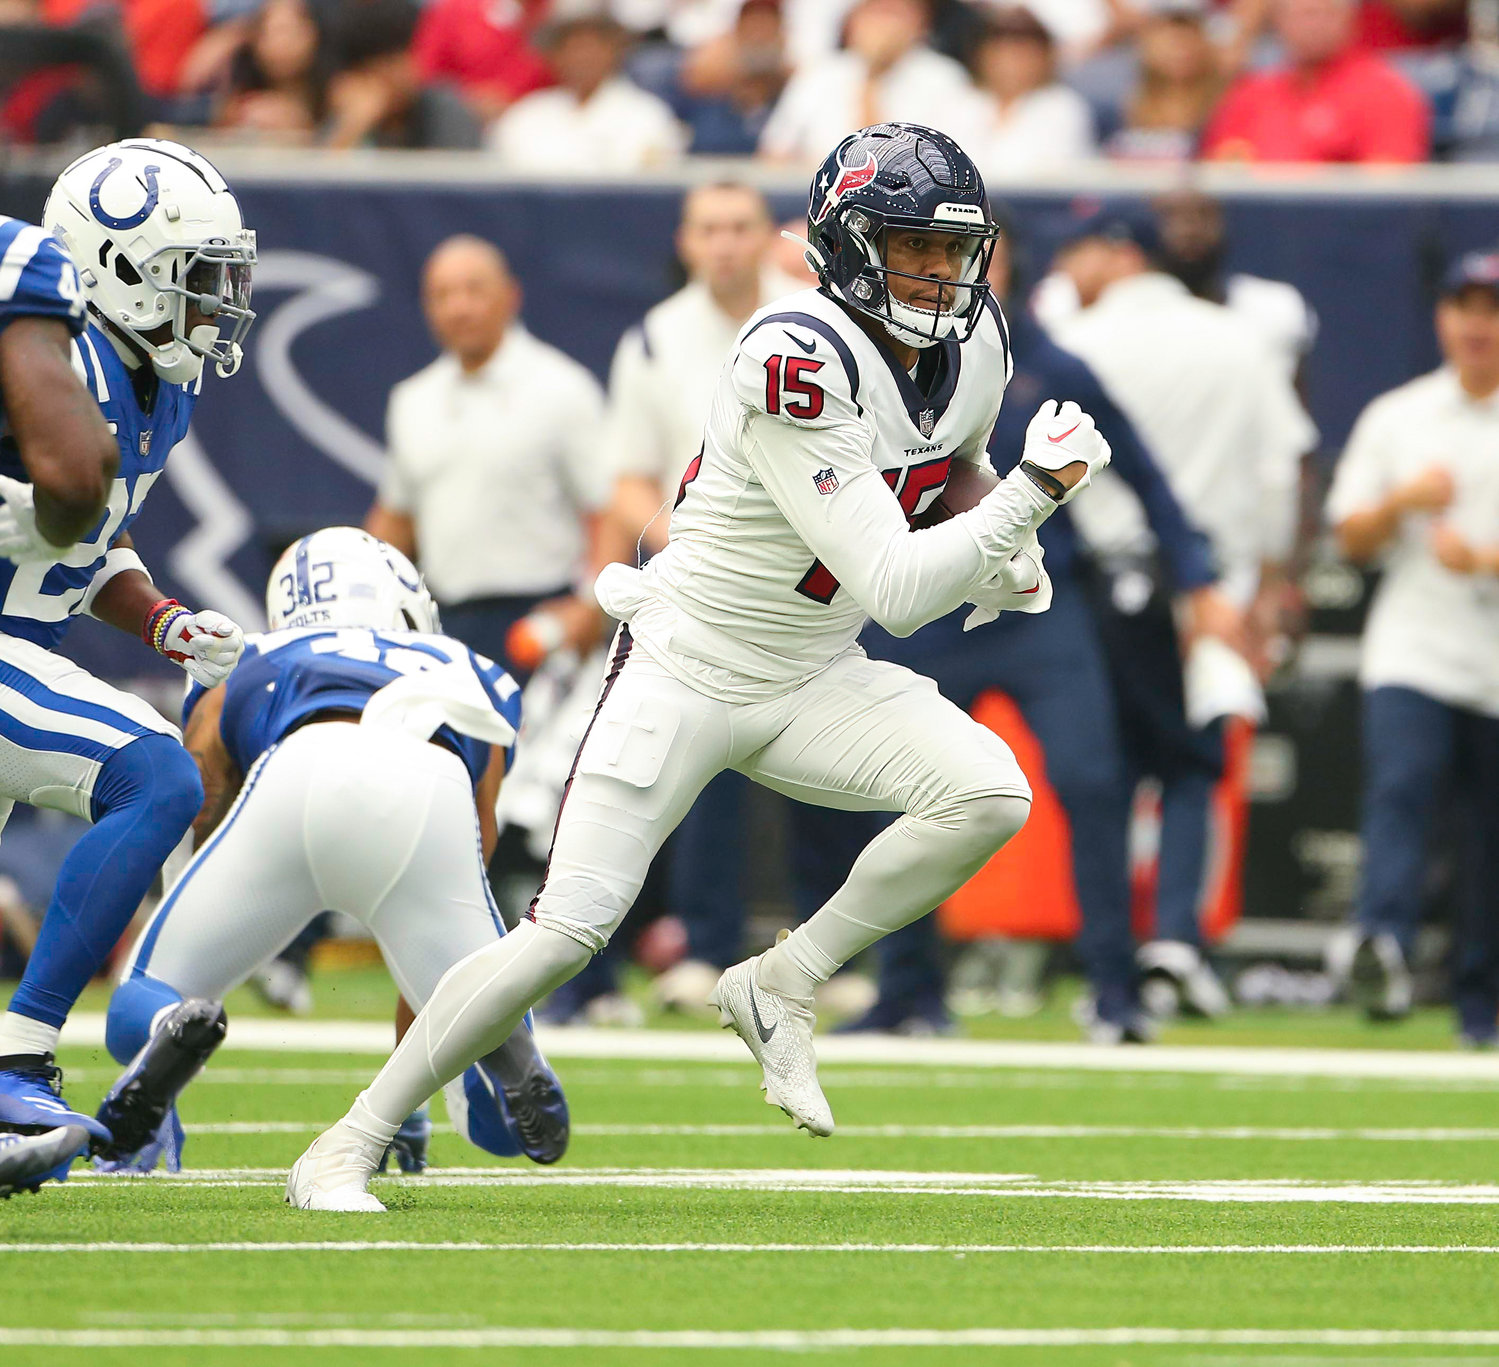 Houston Texans wide receiver Chris Moore (15) carries the ball after a catch during an NFL game between the Texans and the Colts on September 11, 2022 in Houston. The game ended in a 20-20 tie after a scoreless overtime period.